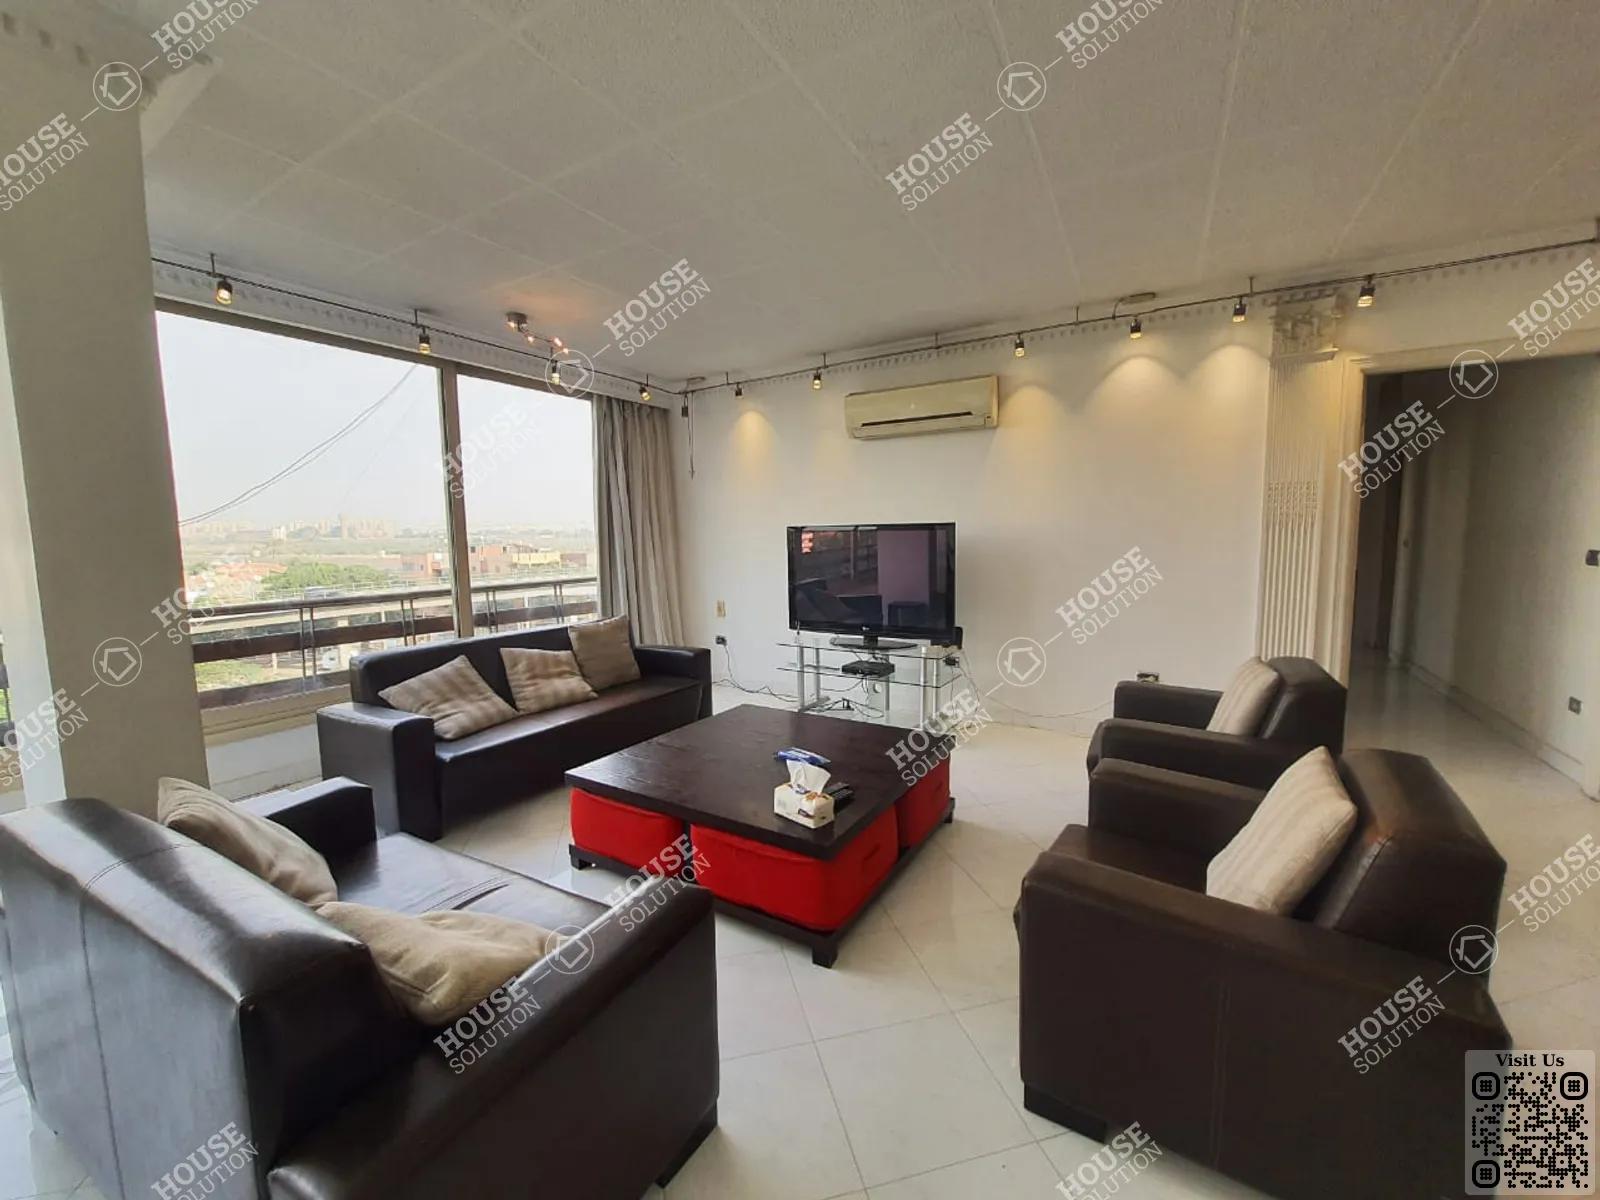 RECEPTION  @ Apartments For Rent In Maadi Maadi Sarayat Area: 200 m² consists of 3 Bedrooms 2 Bathrooms Modern furnished 5 stars #4795-0